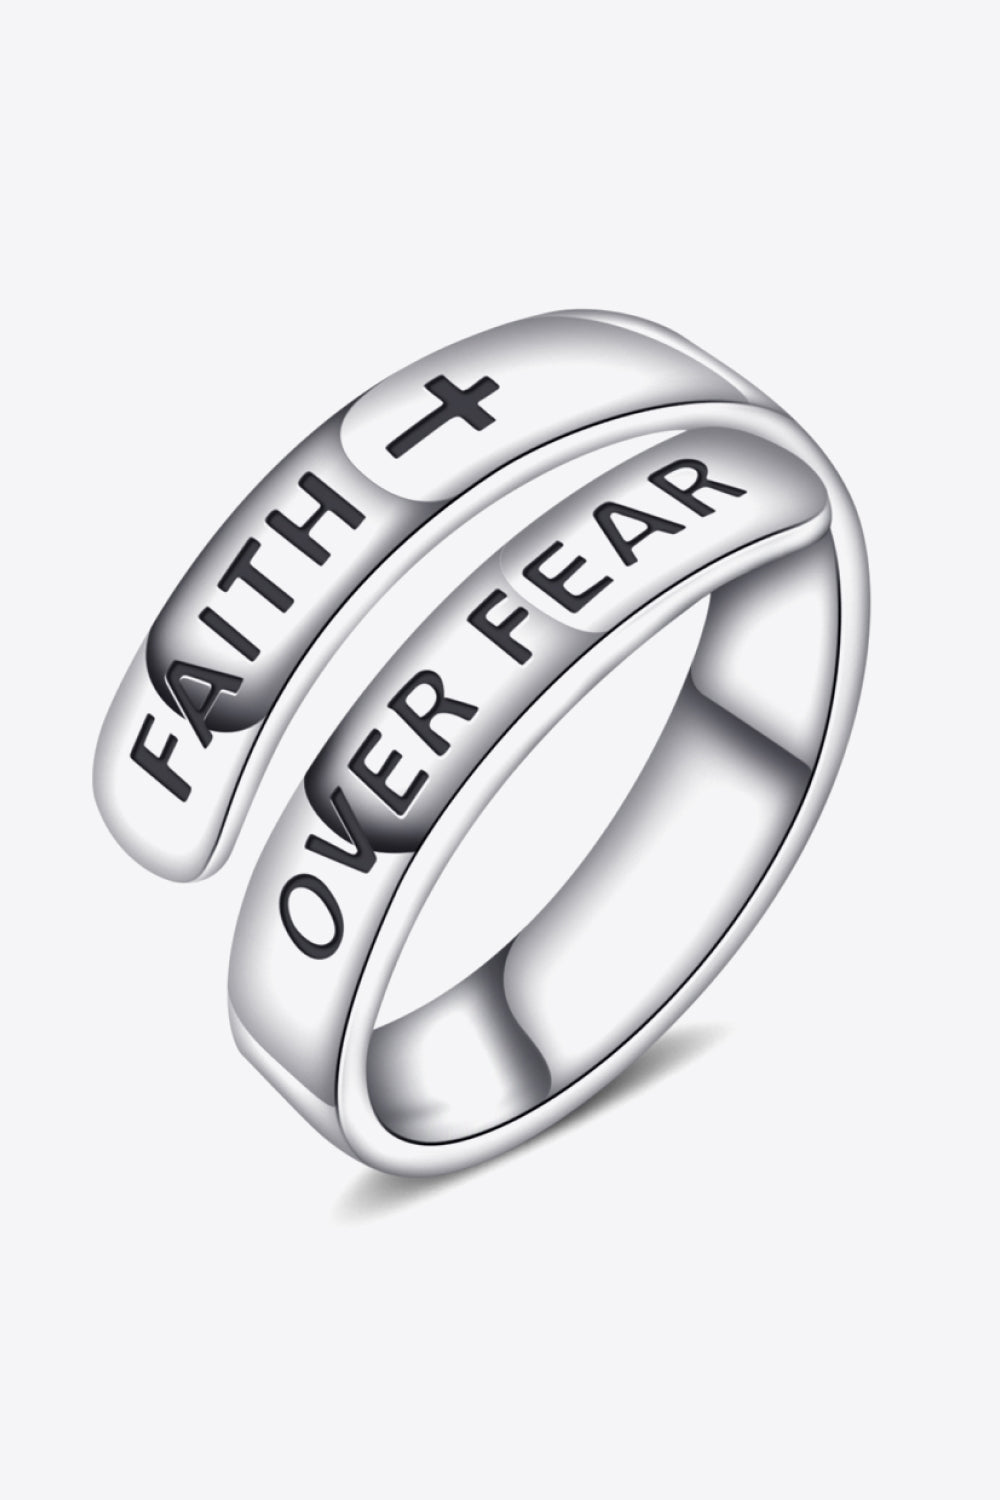 925 Sterling Silver FAITH OVER FEAR Bypass Ring-Ever Joy